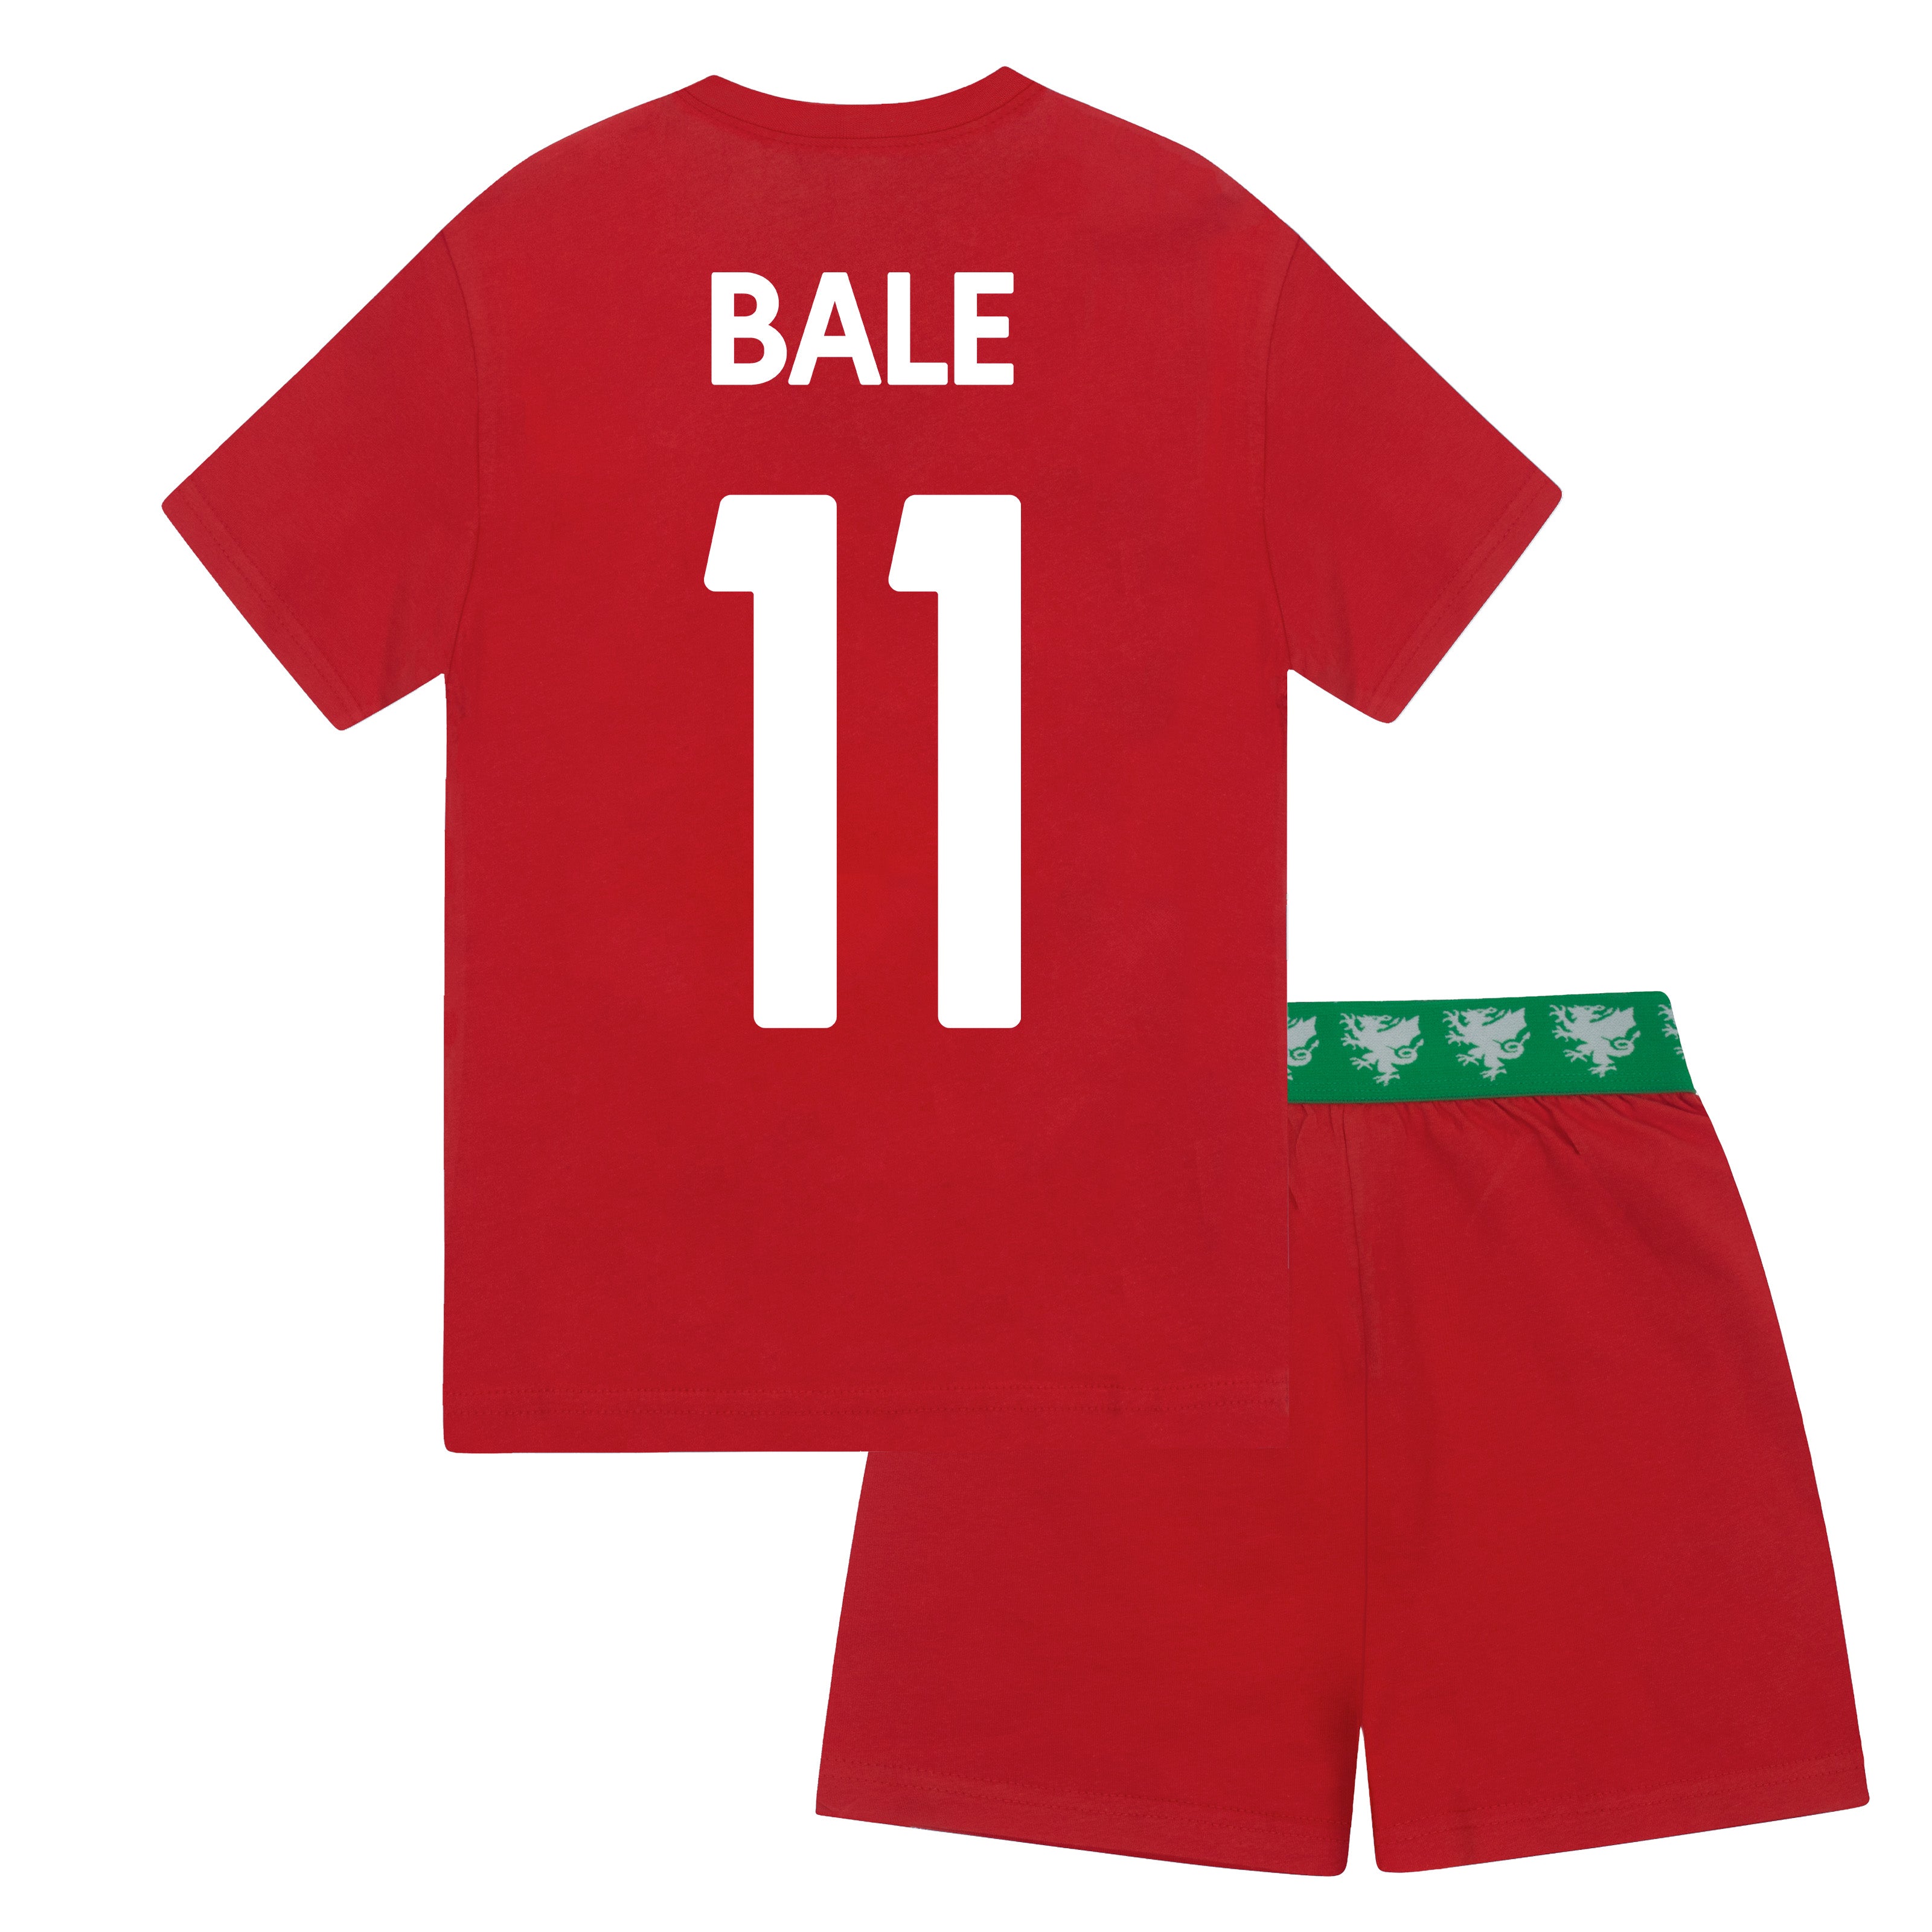 Red Bale